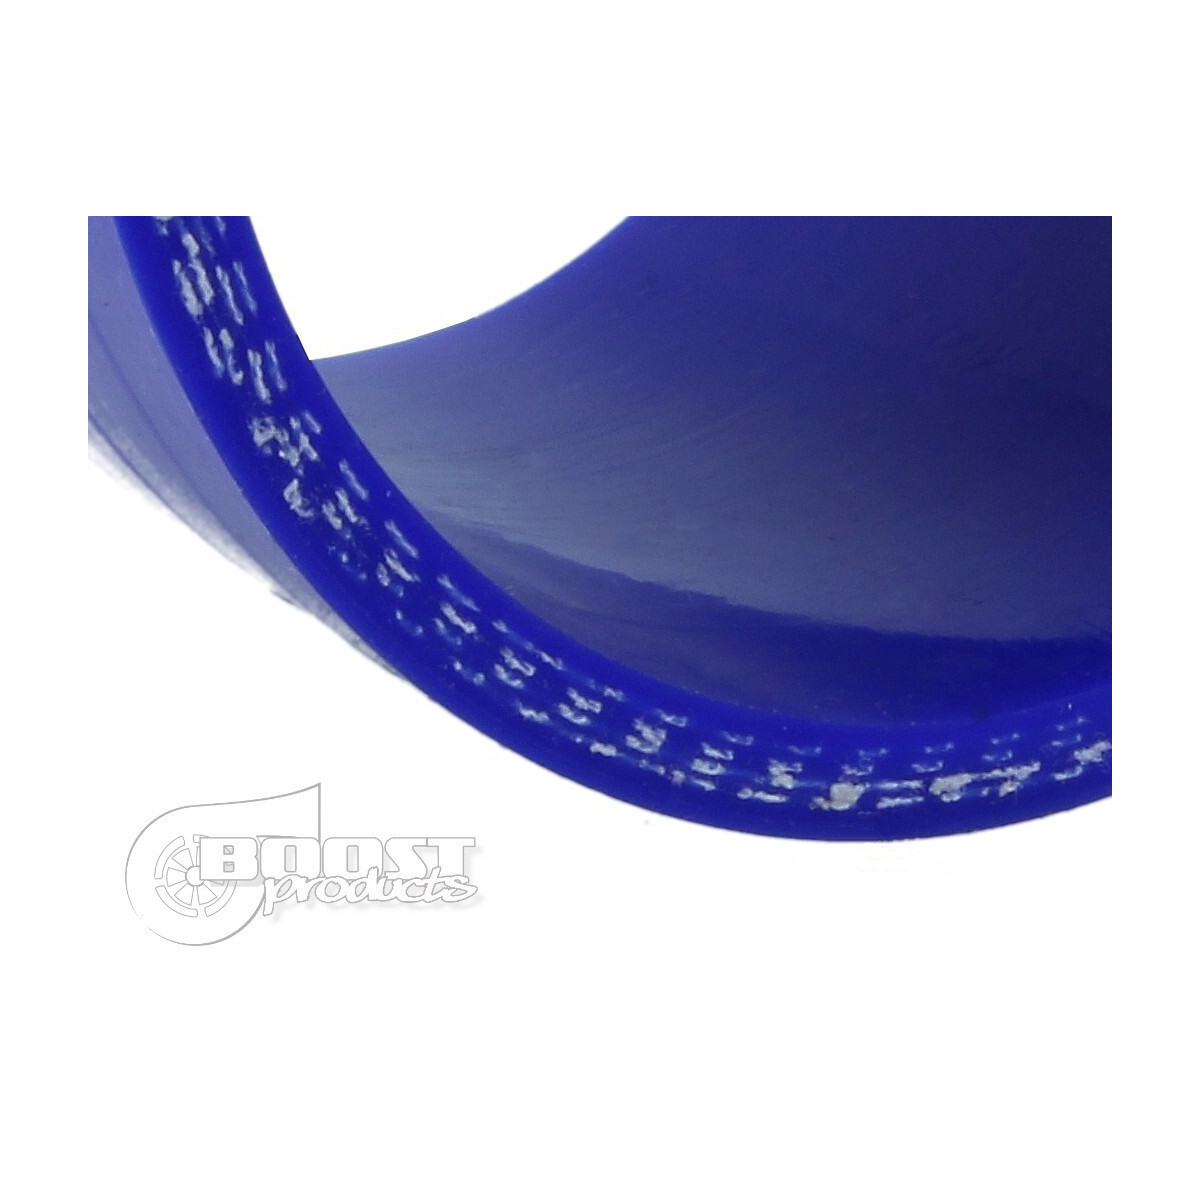 BOOST products Silicone Transition elbow 90°, 54 - 48mm, blue